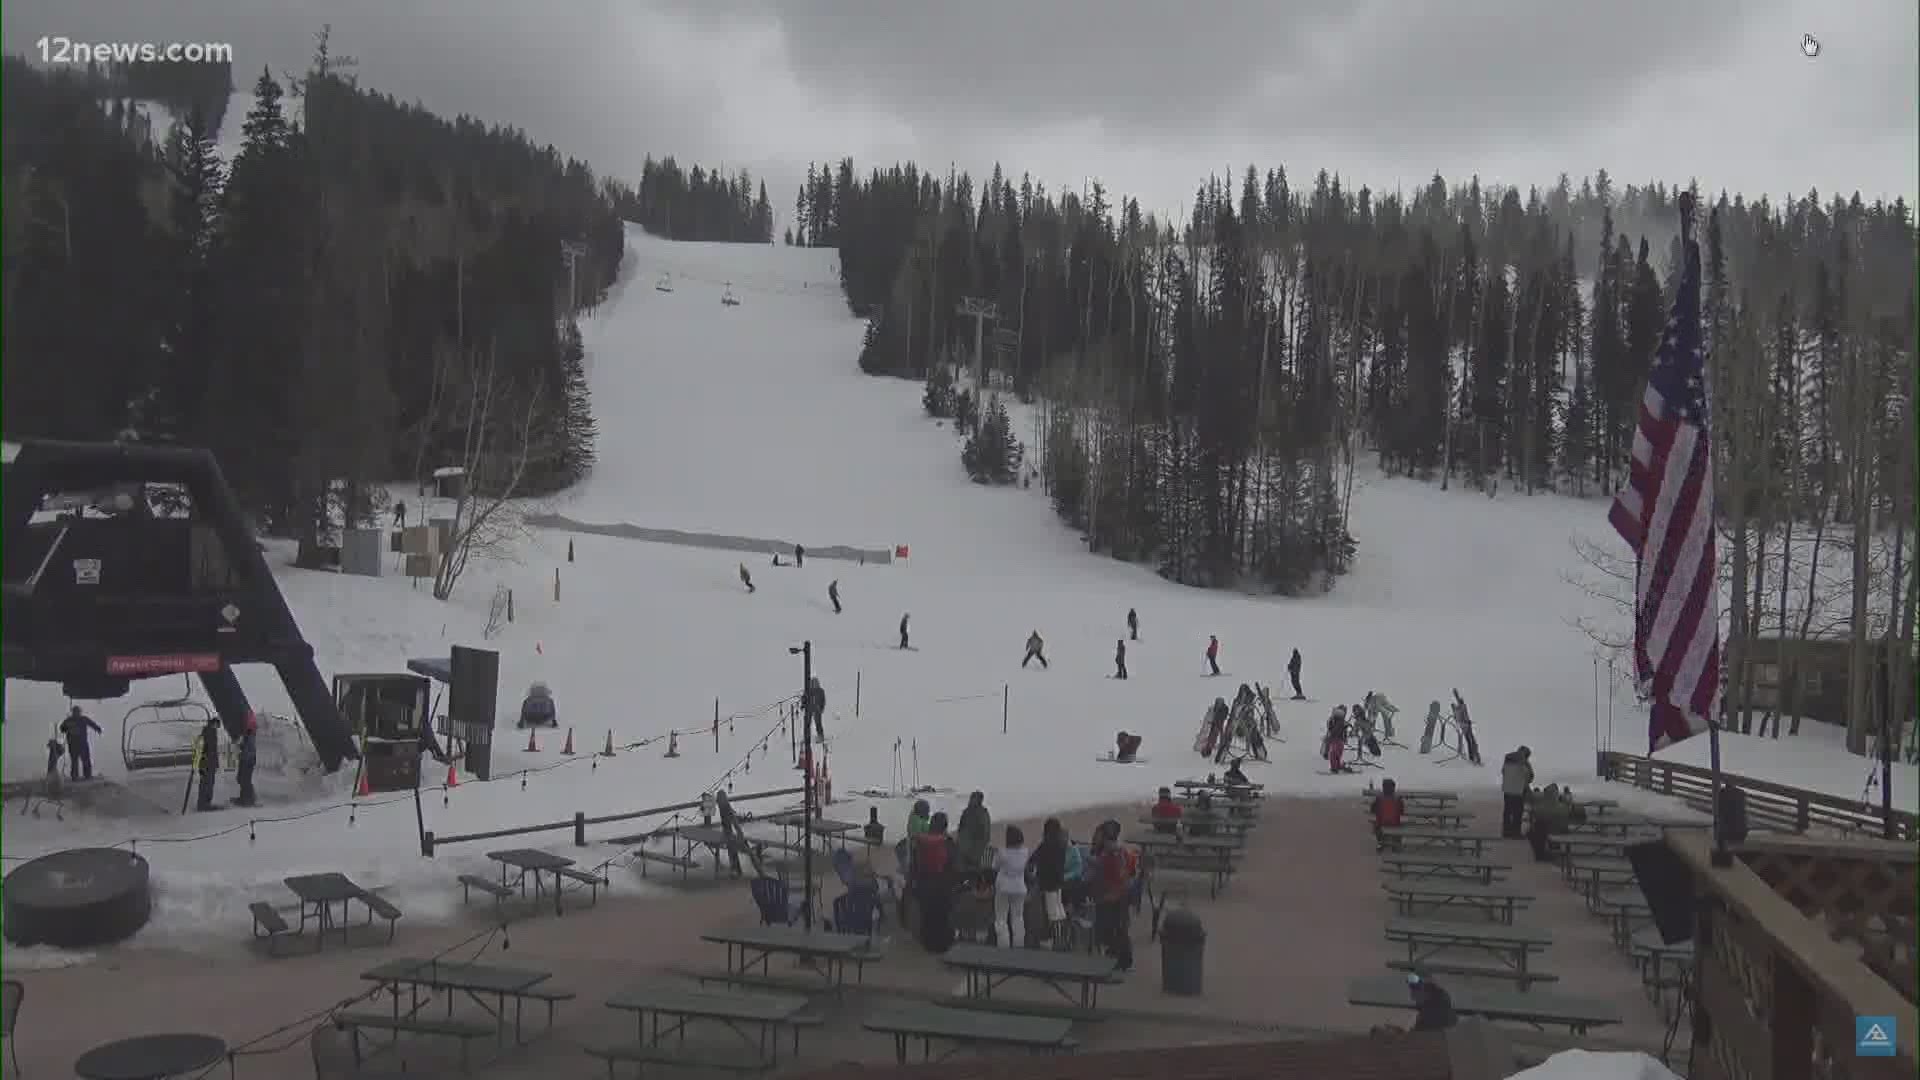 Arizona Snowbowl is set to open for the ski season in November, but things will look different because of the coronavirus pandemic.